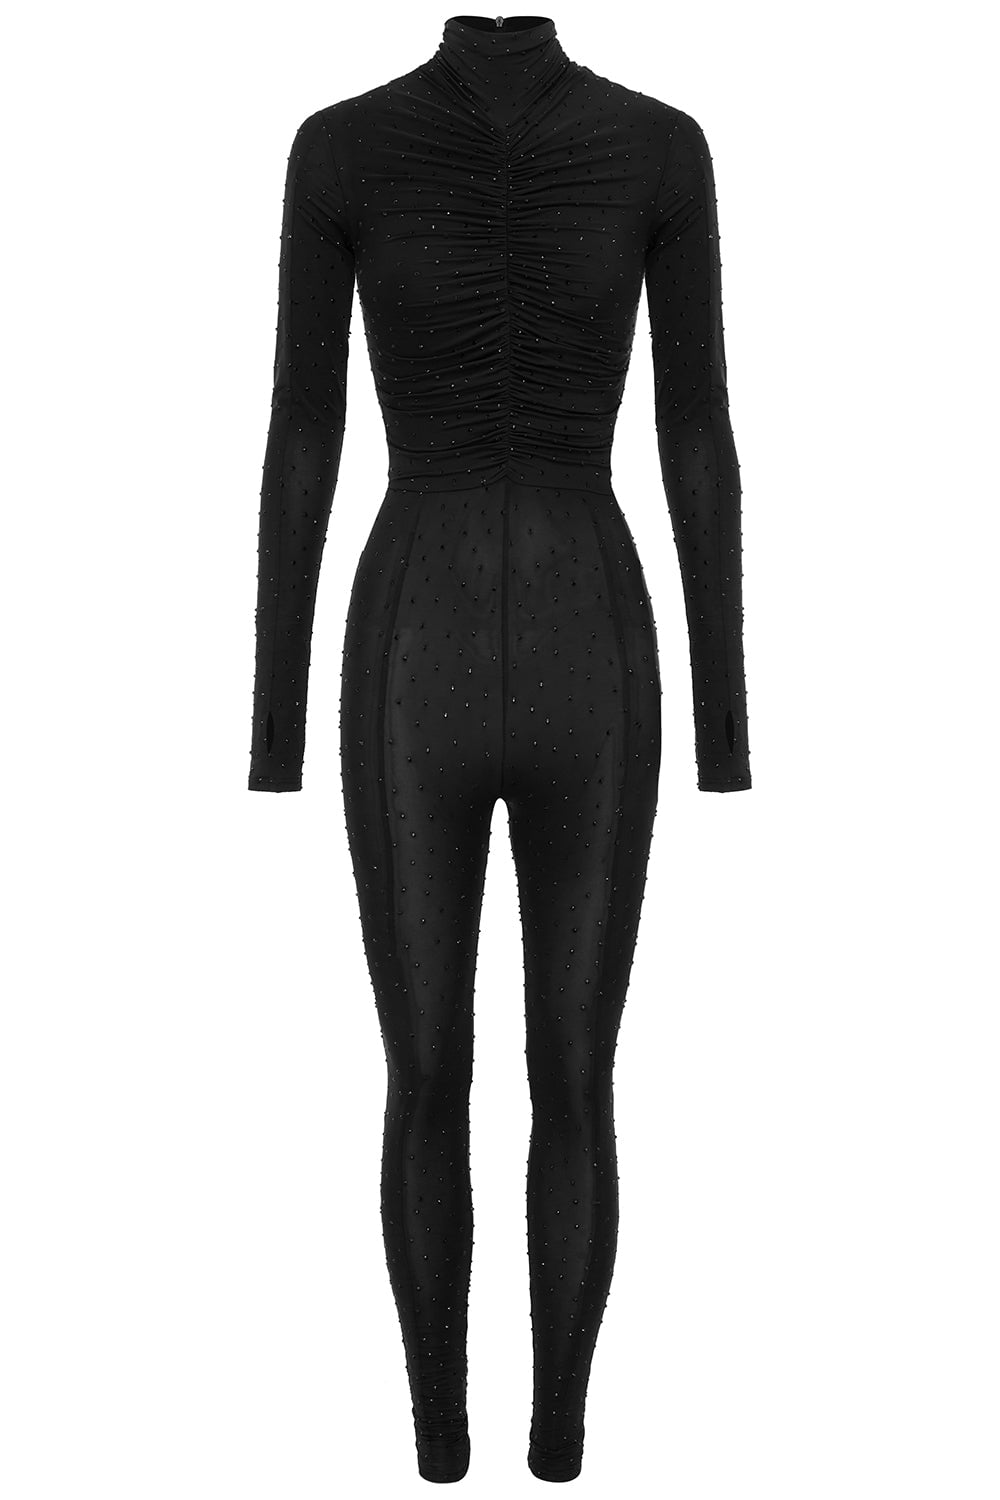 ALEX PERRY-Cove Catsuit-